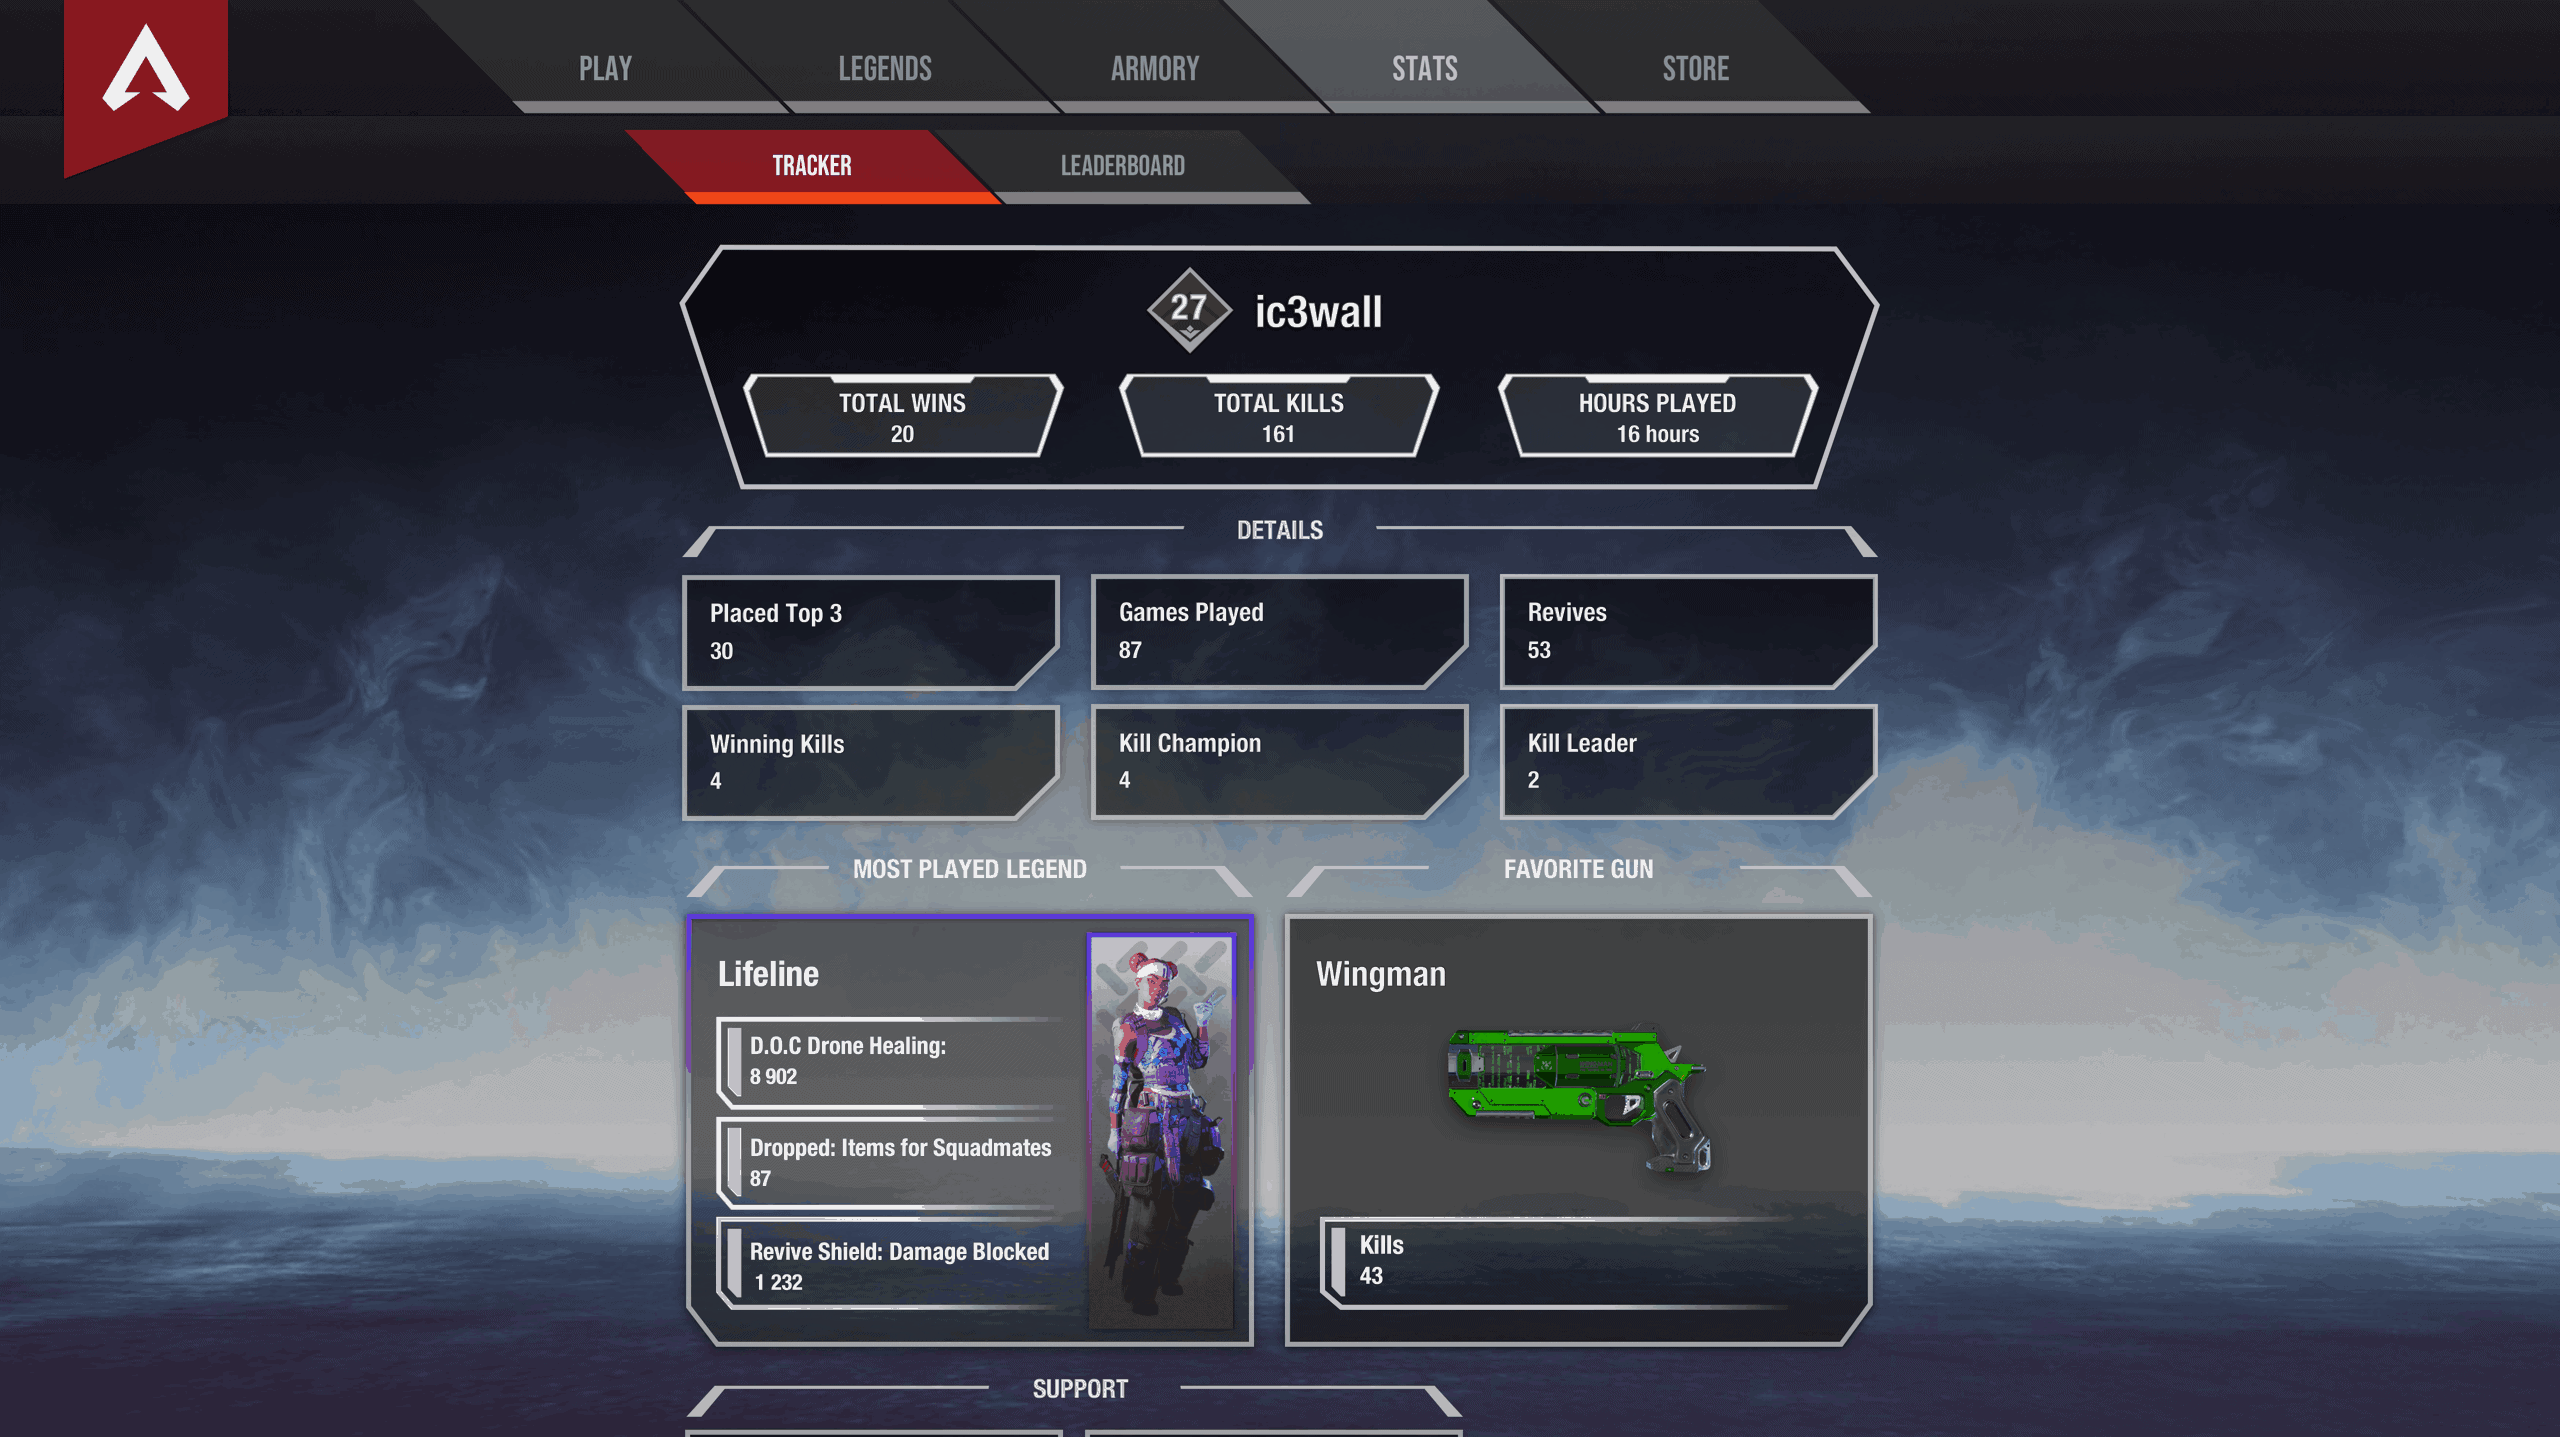 Check out this amazing Apex Legends stats tracker concept by a Redditor